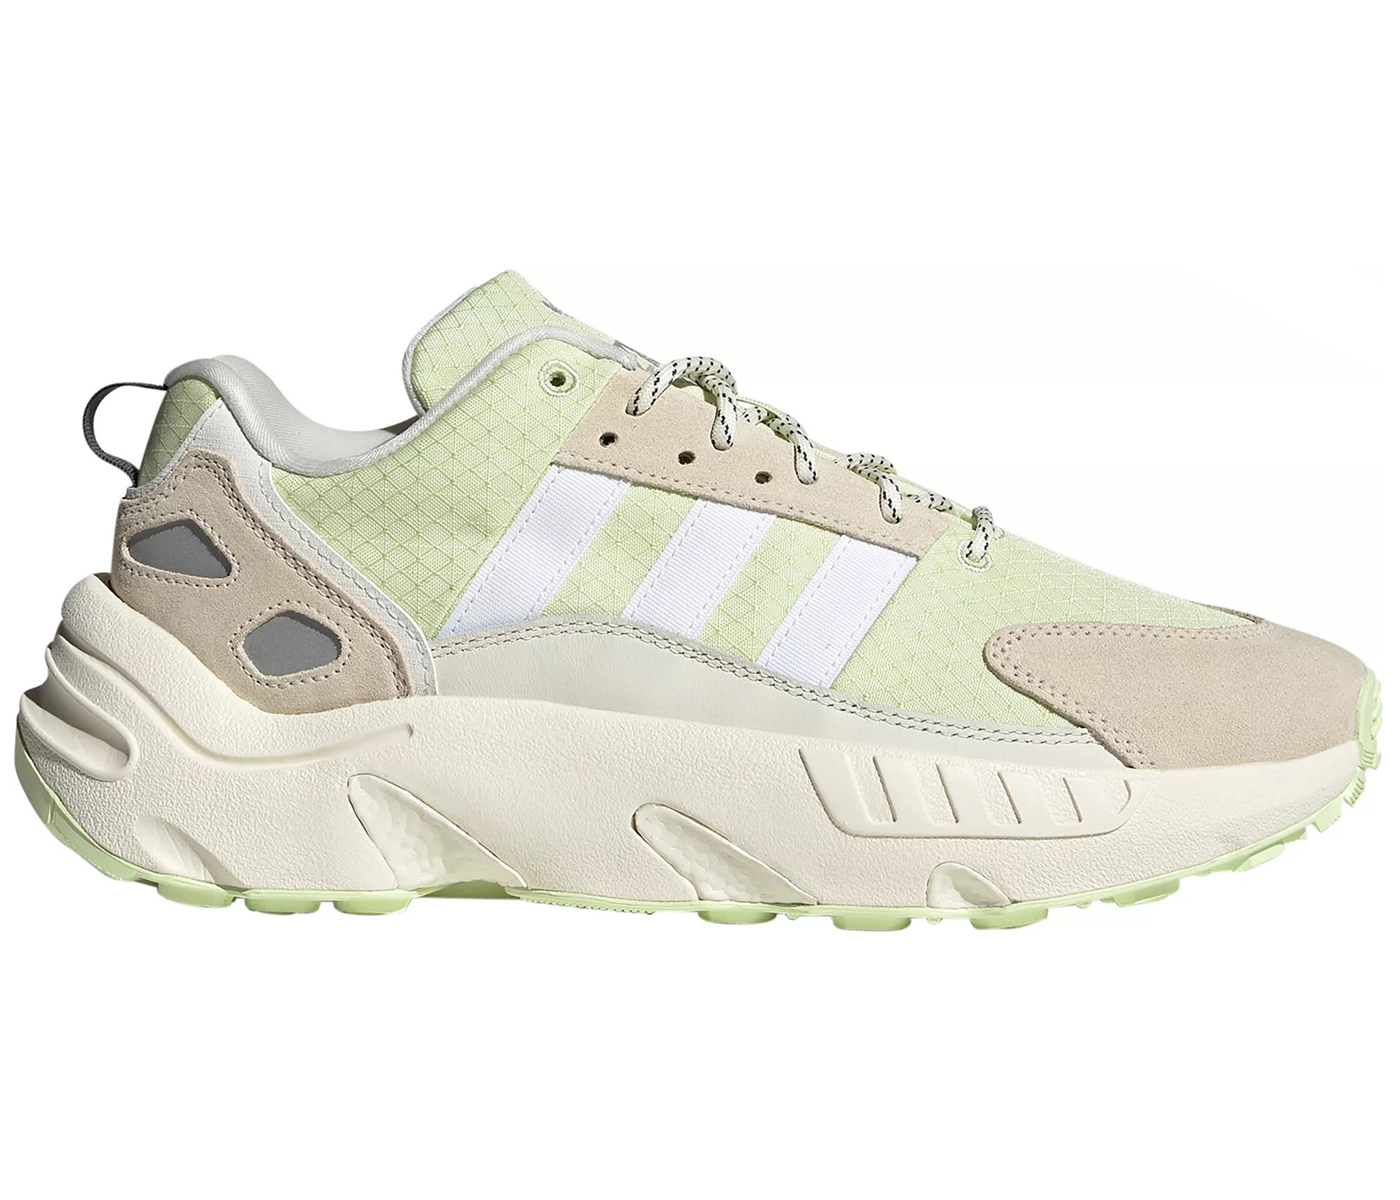 adidas ZX 22 Boost Sand Yellow Tint Men's - GY5271 - US